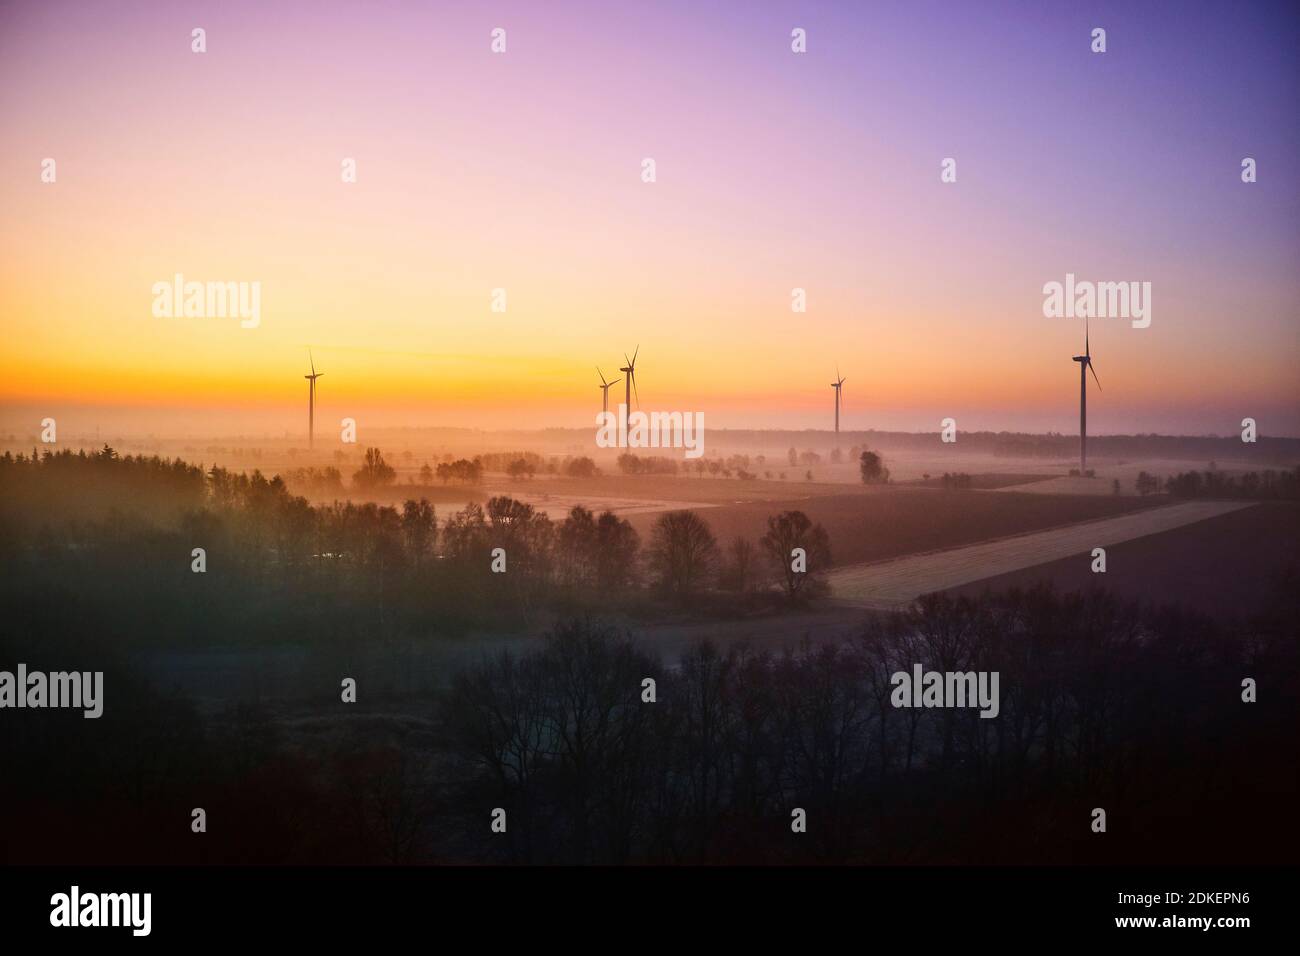 Landscape, Elbe Valley, Germany, Northern Germany, Lower Saxony, Elbe foreland near Hohnstorf, aerial view at sunrise, golden hour, colored sky, meadows in the morning mist, wind turbines Stock Photo